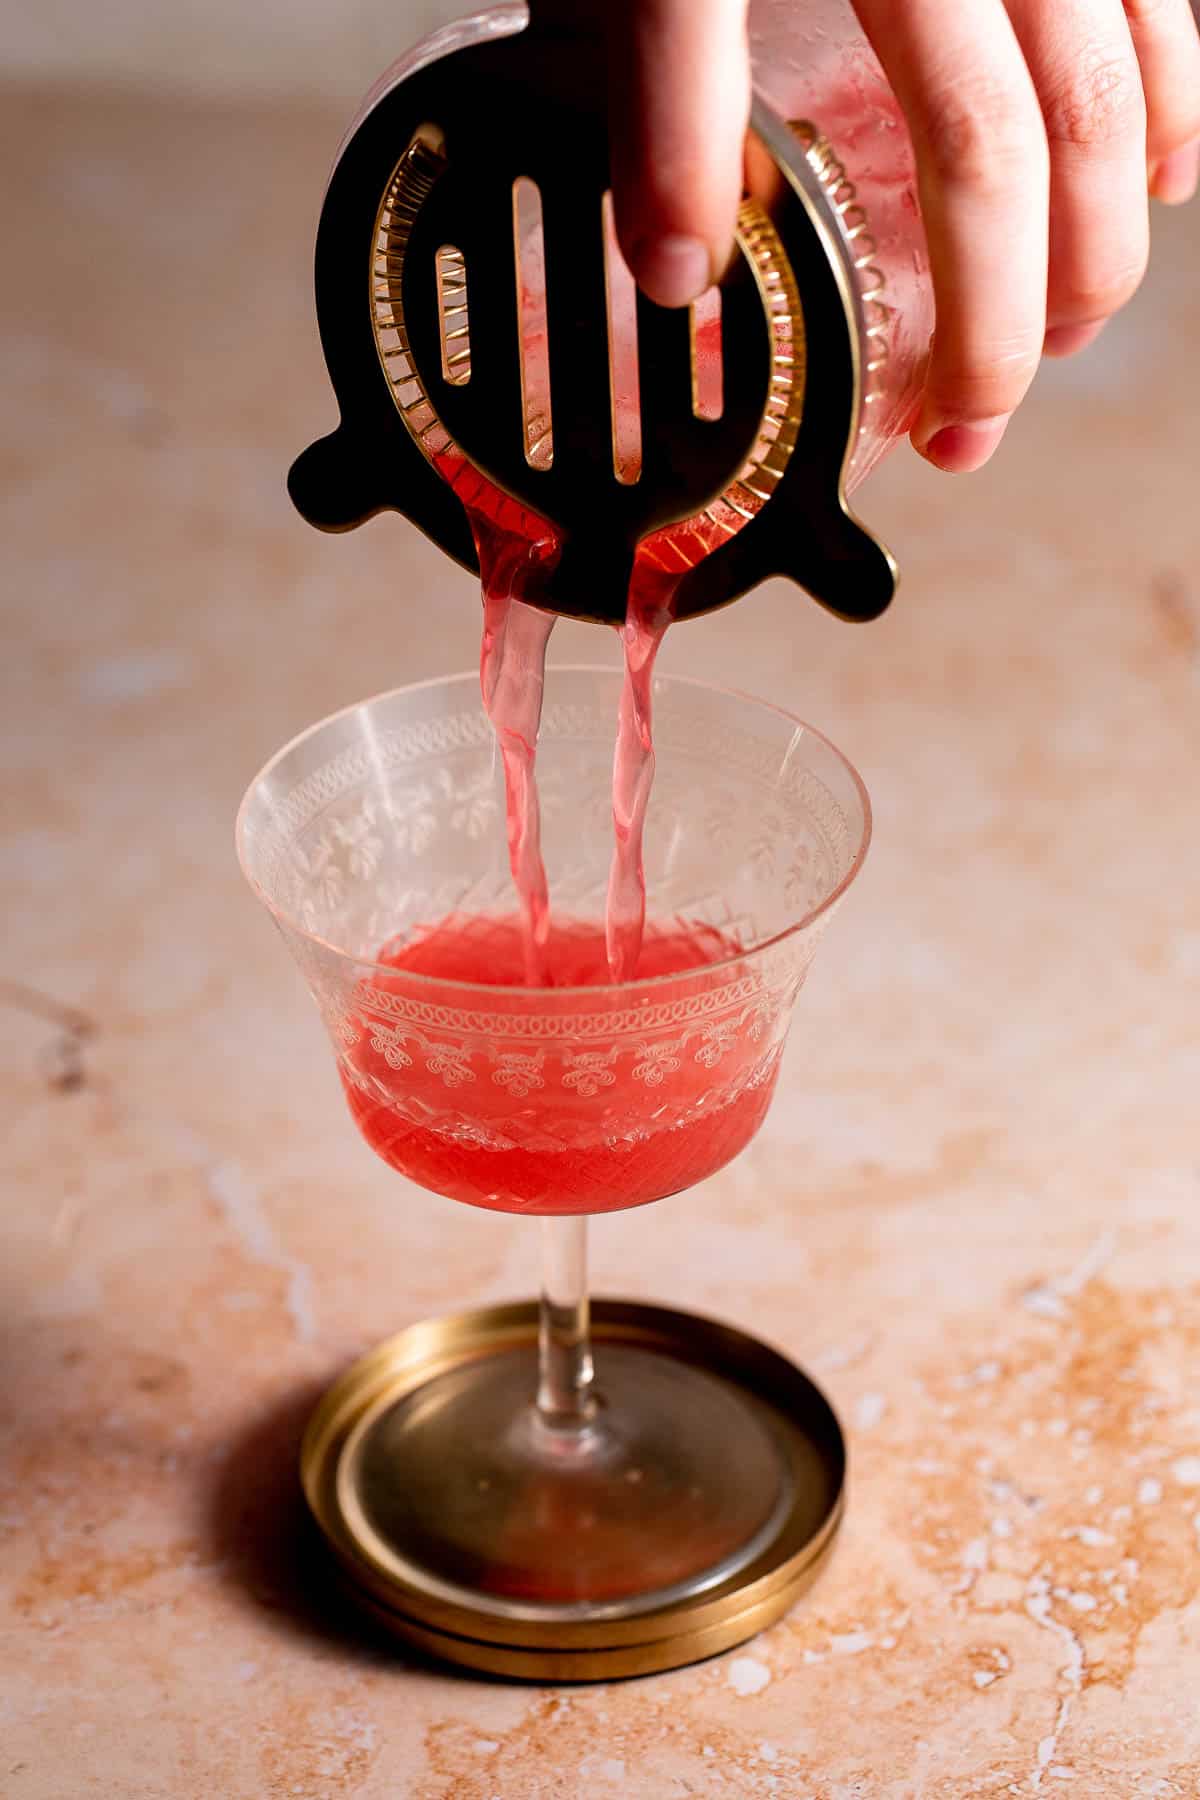 A red cocktail being strained into a cocktail glass.